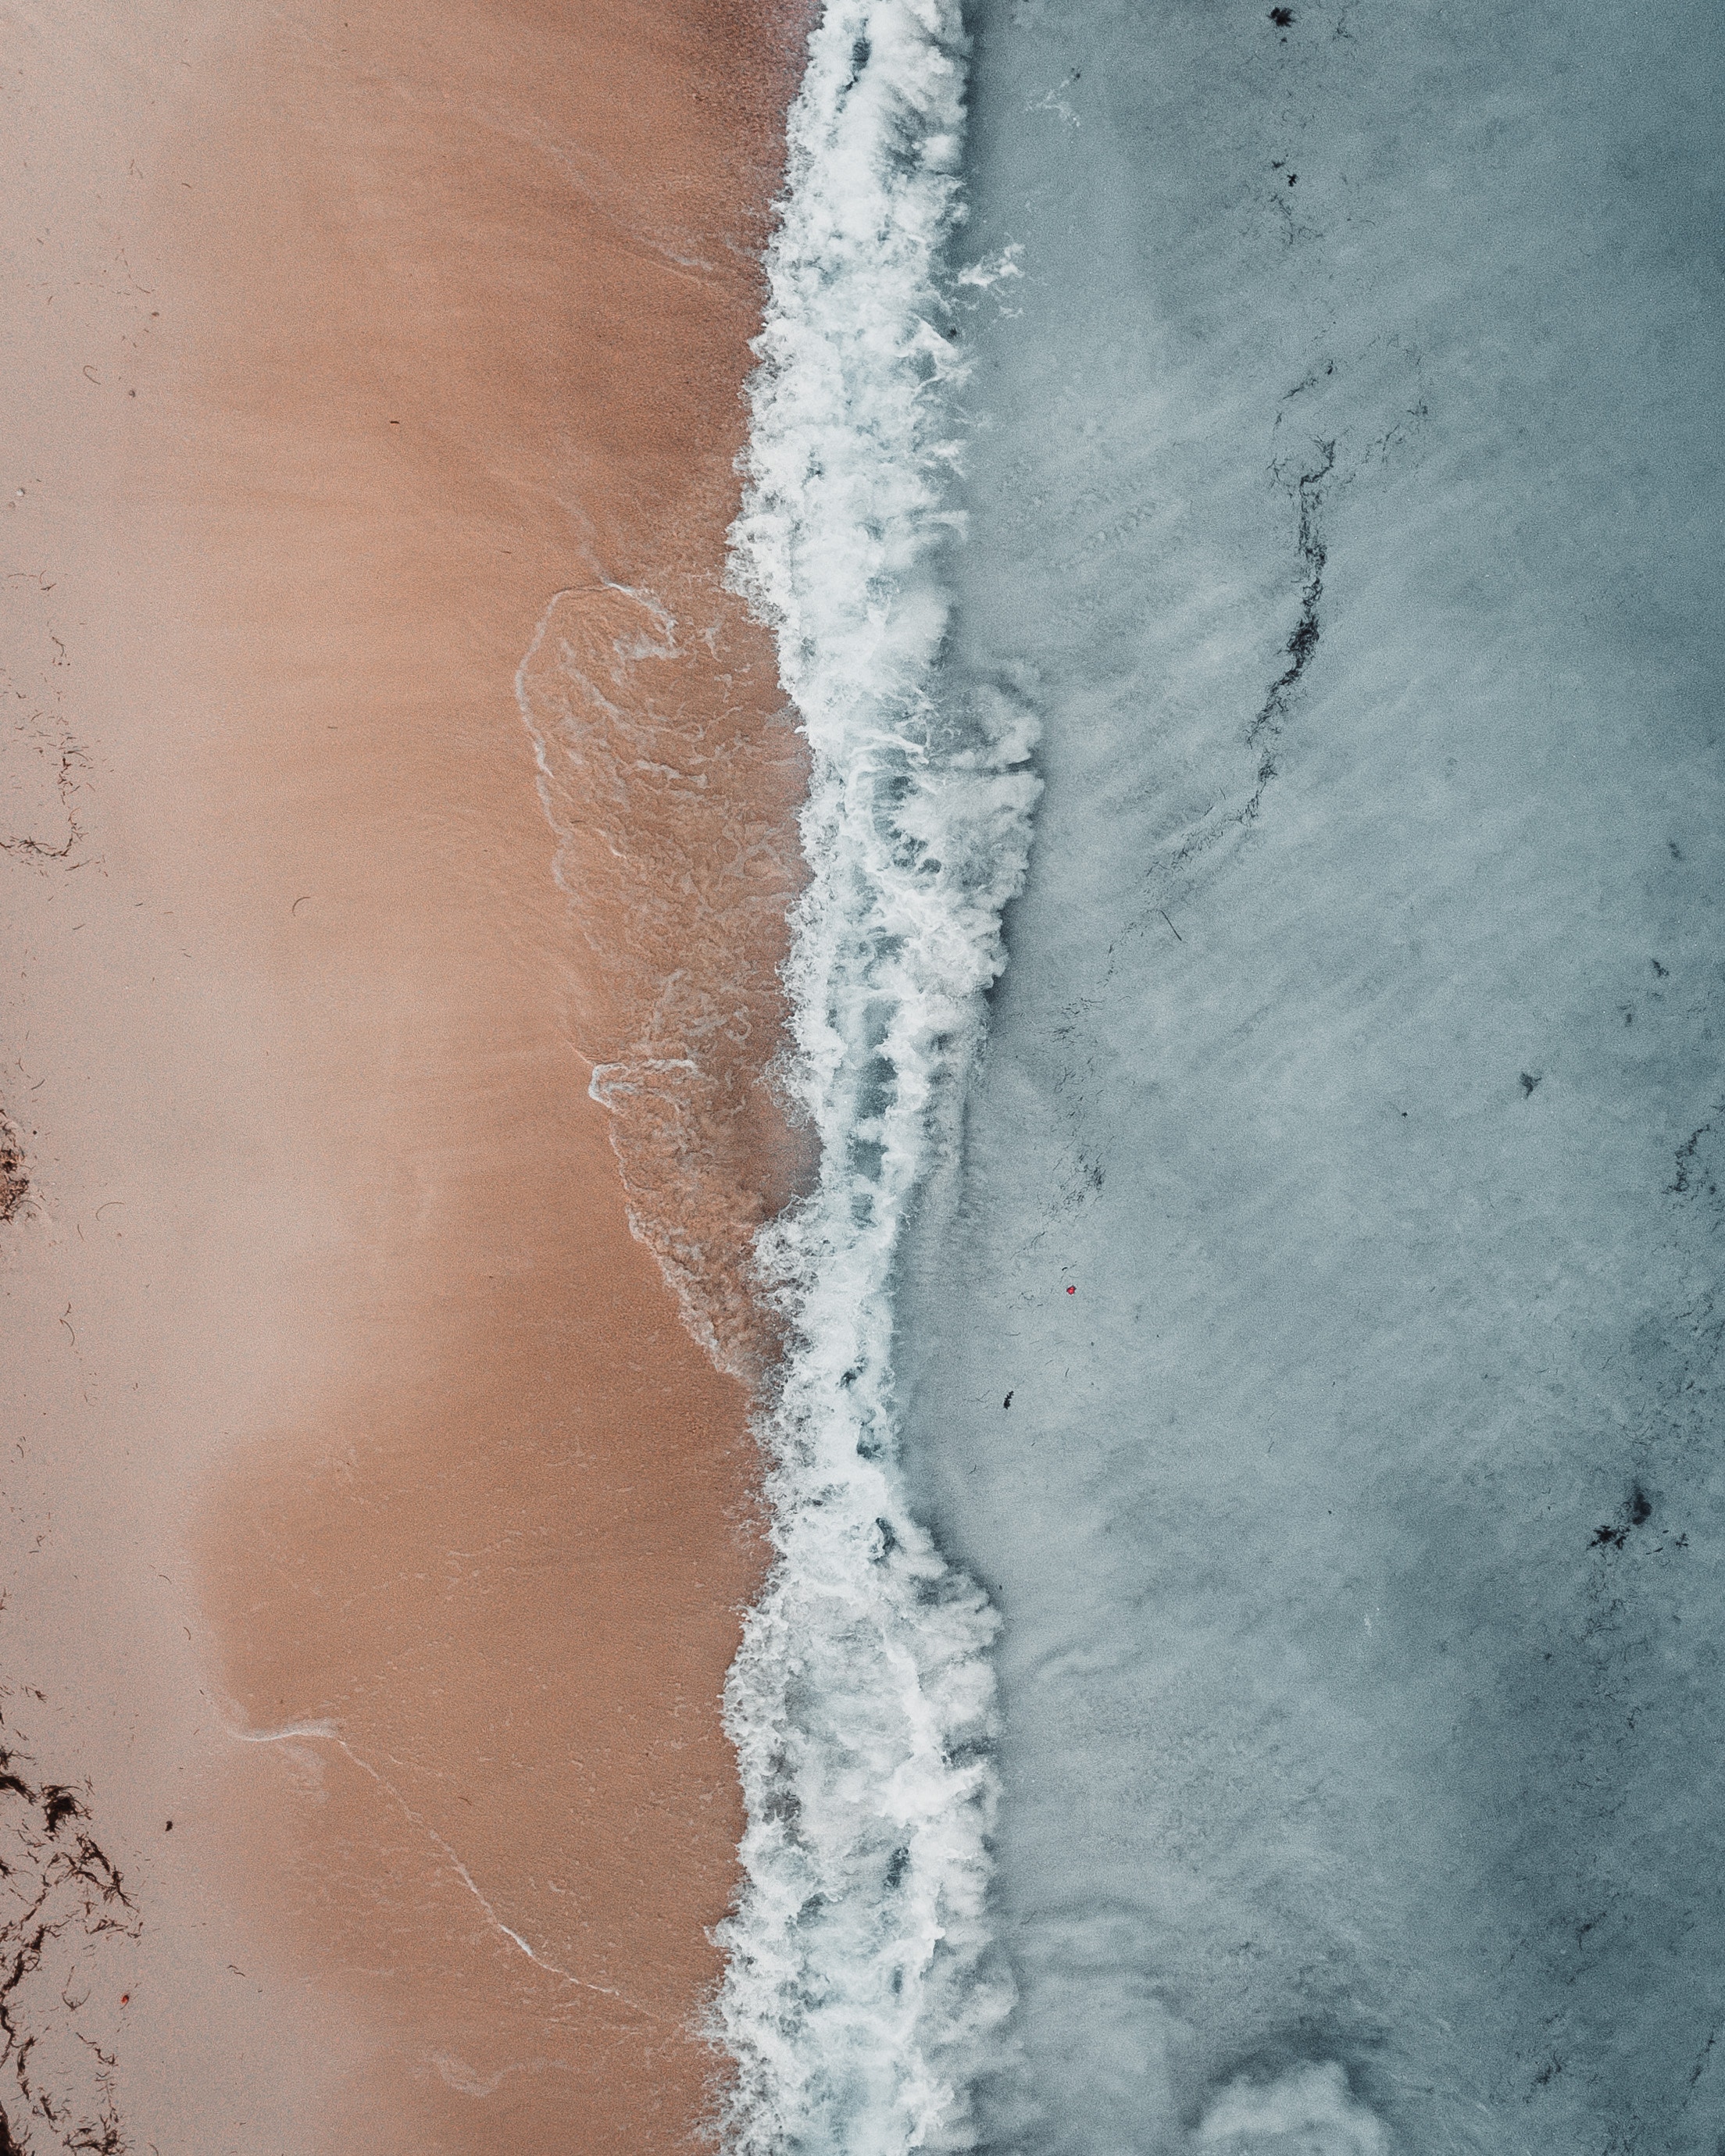 wave, view from above, nature, sand, shore, bank, ocean, surf iphone wallpaper